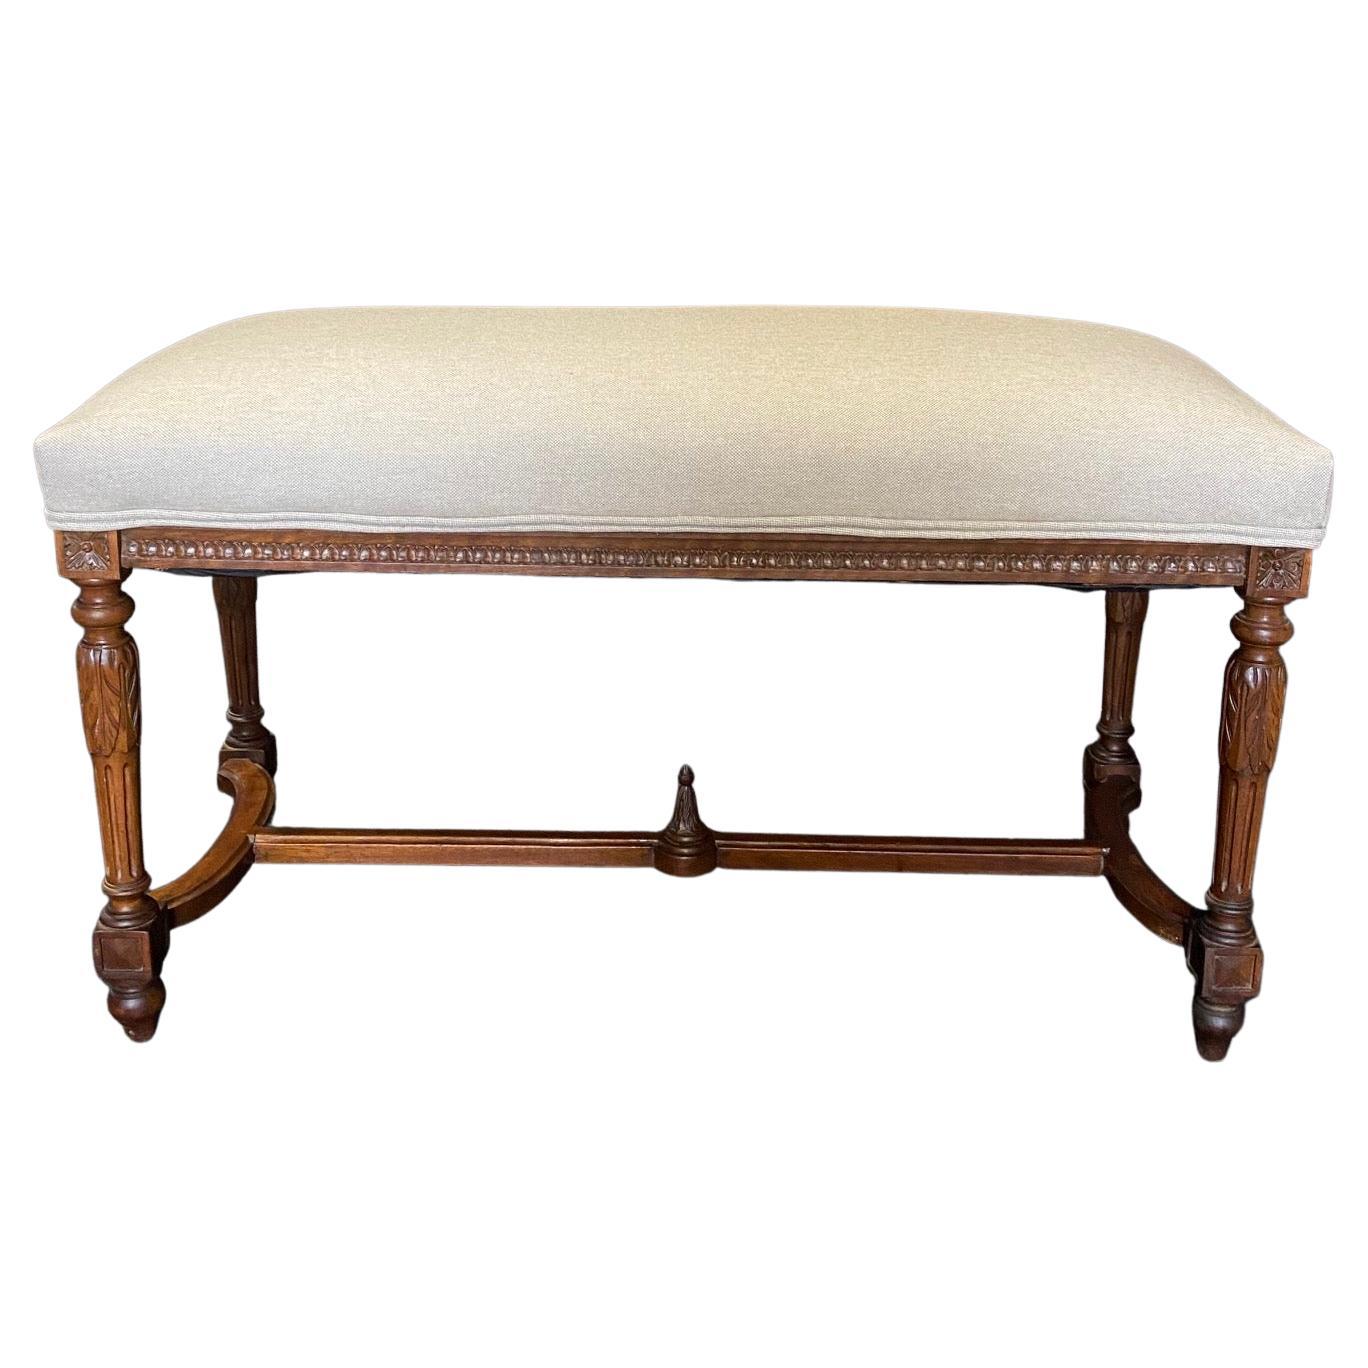 Antique French Louis XVI Walnut Upholstered Seat Bench